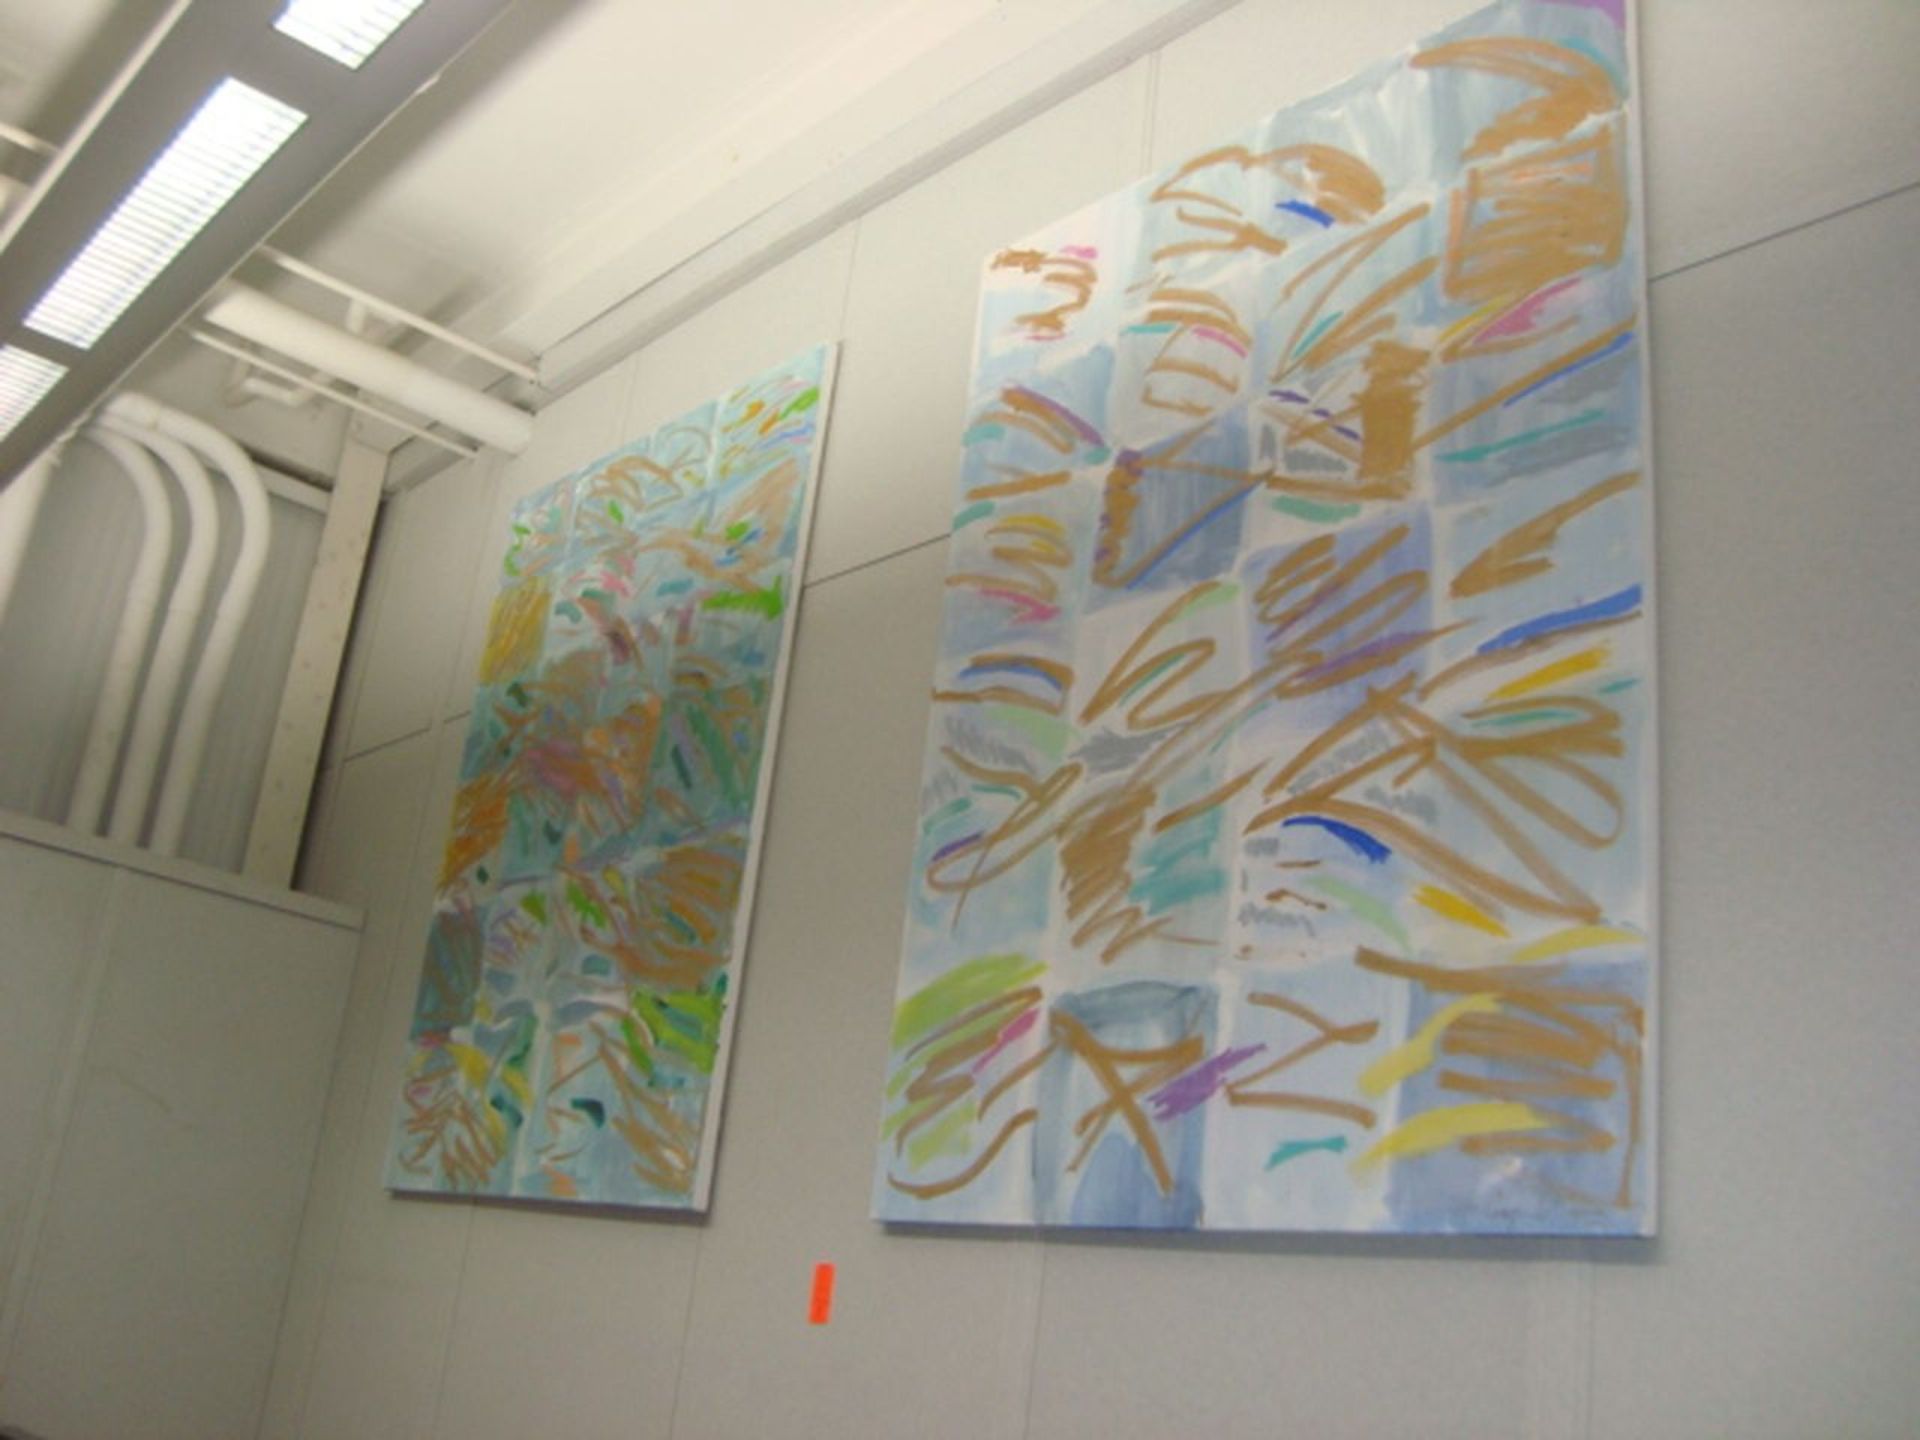 (Lot of 2) 8' ft. x 6' ft. Wall Art Paintings. (South Office 1 st Floor) - Image 6 of 6